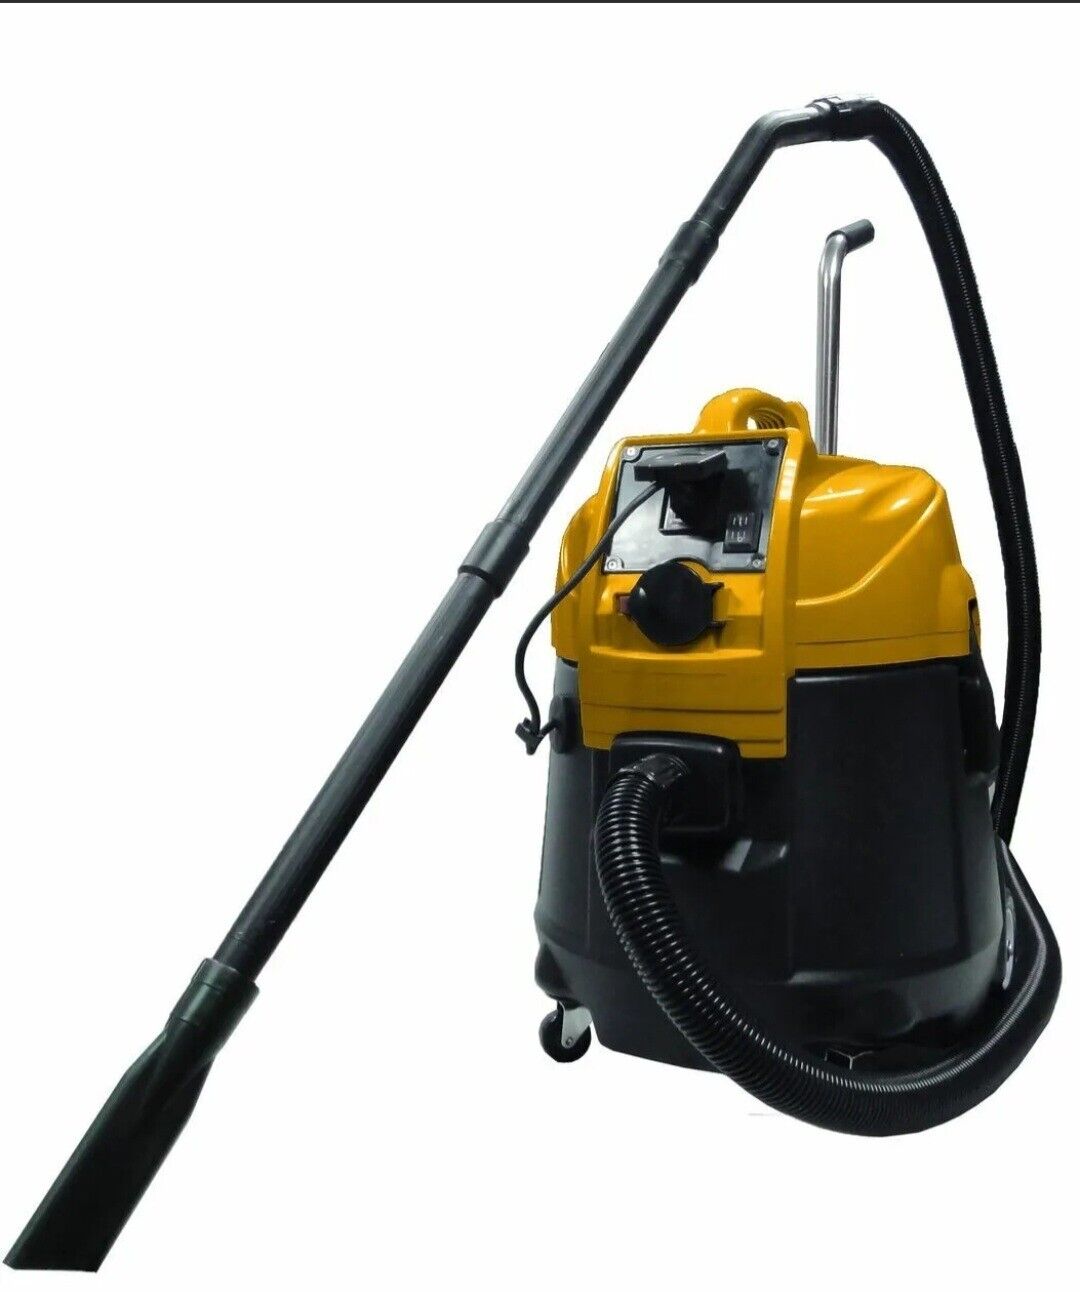 Matala Power-cyclone Pond Vacuum Continuous Pond Vacuum With Power Discharge